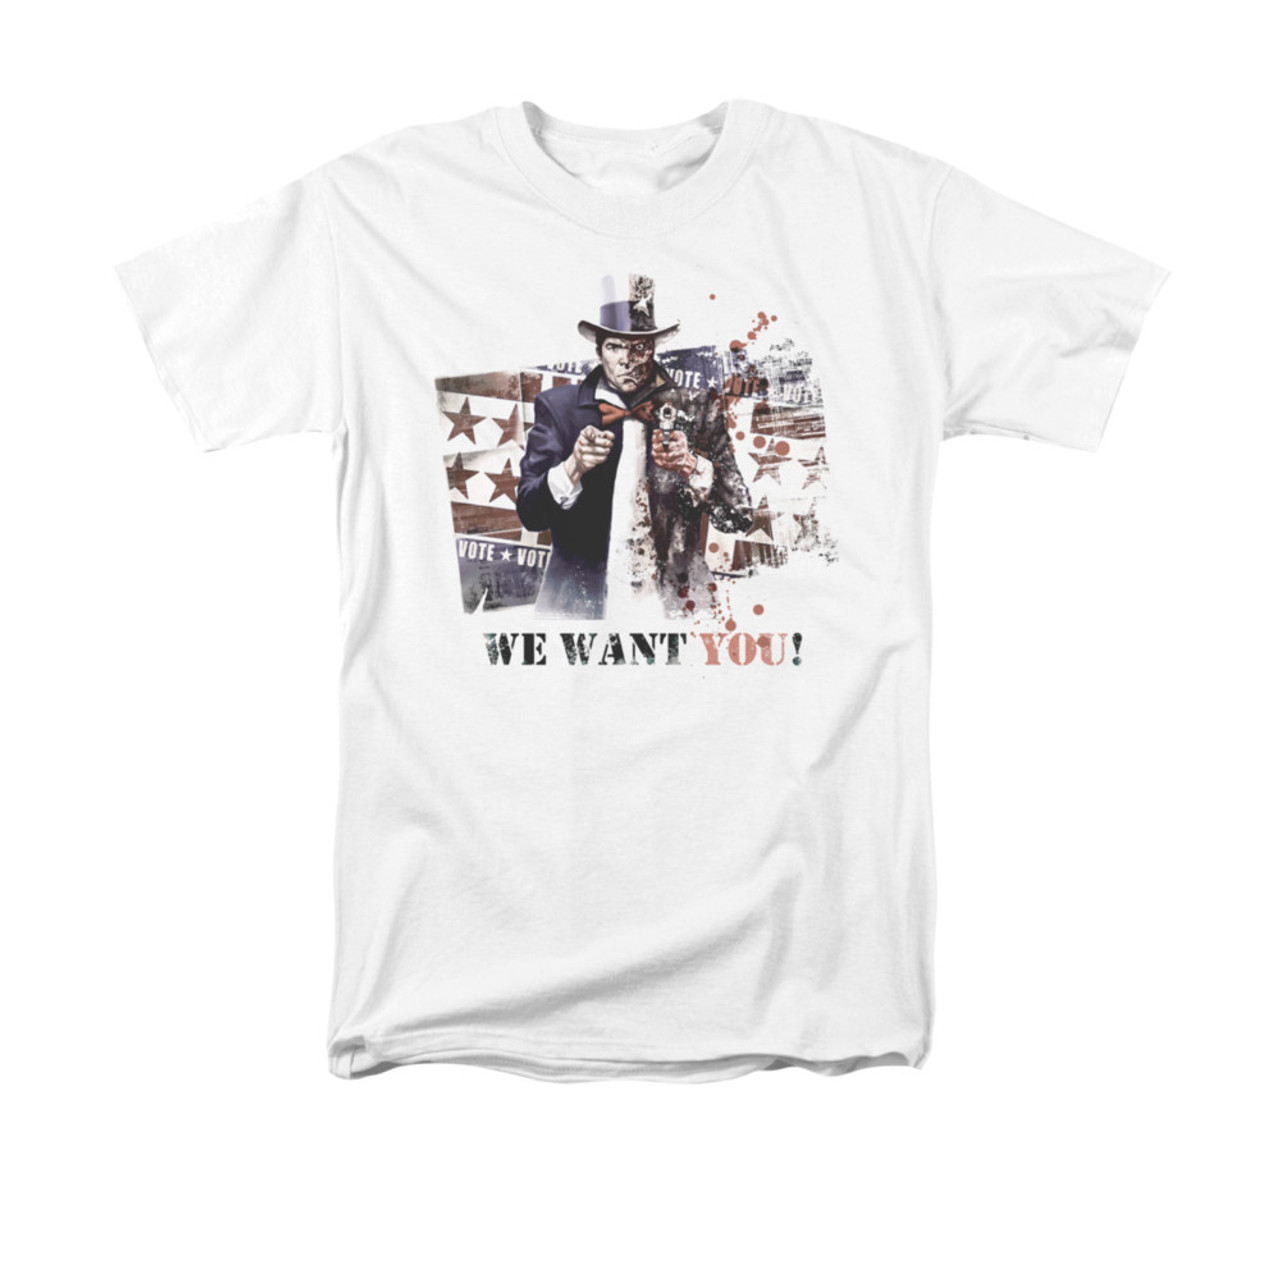 https://cdn11.bigcommerce.com/s-kjvm95bh8i/images/stencil/1280x1280/products/55686/91167/two-face-arkham-city-we-want-you-t-shirt-3__18725.1512230542.jpg?c=2